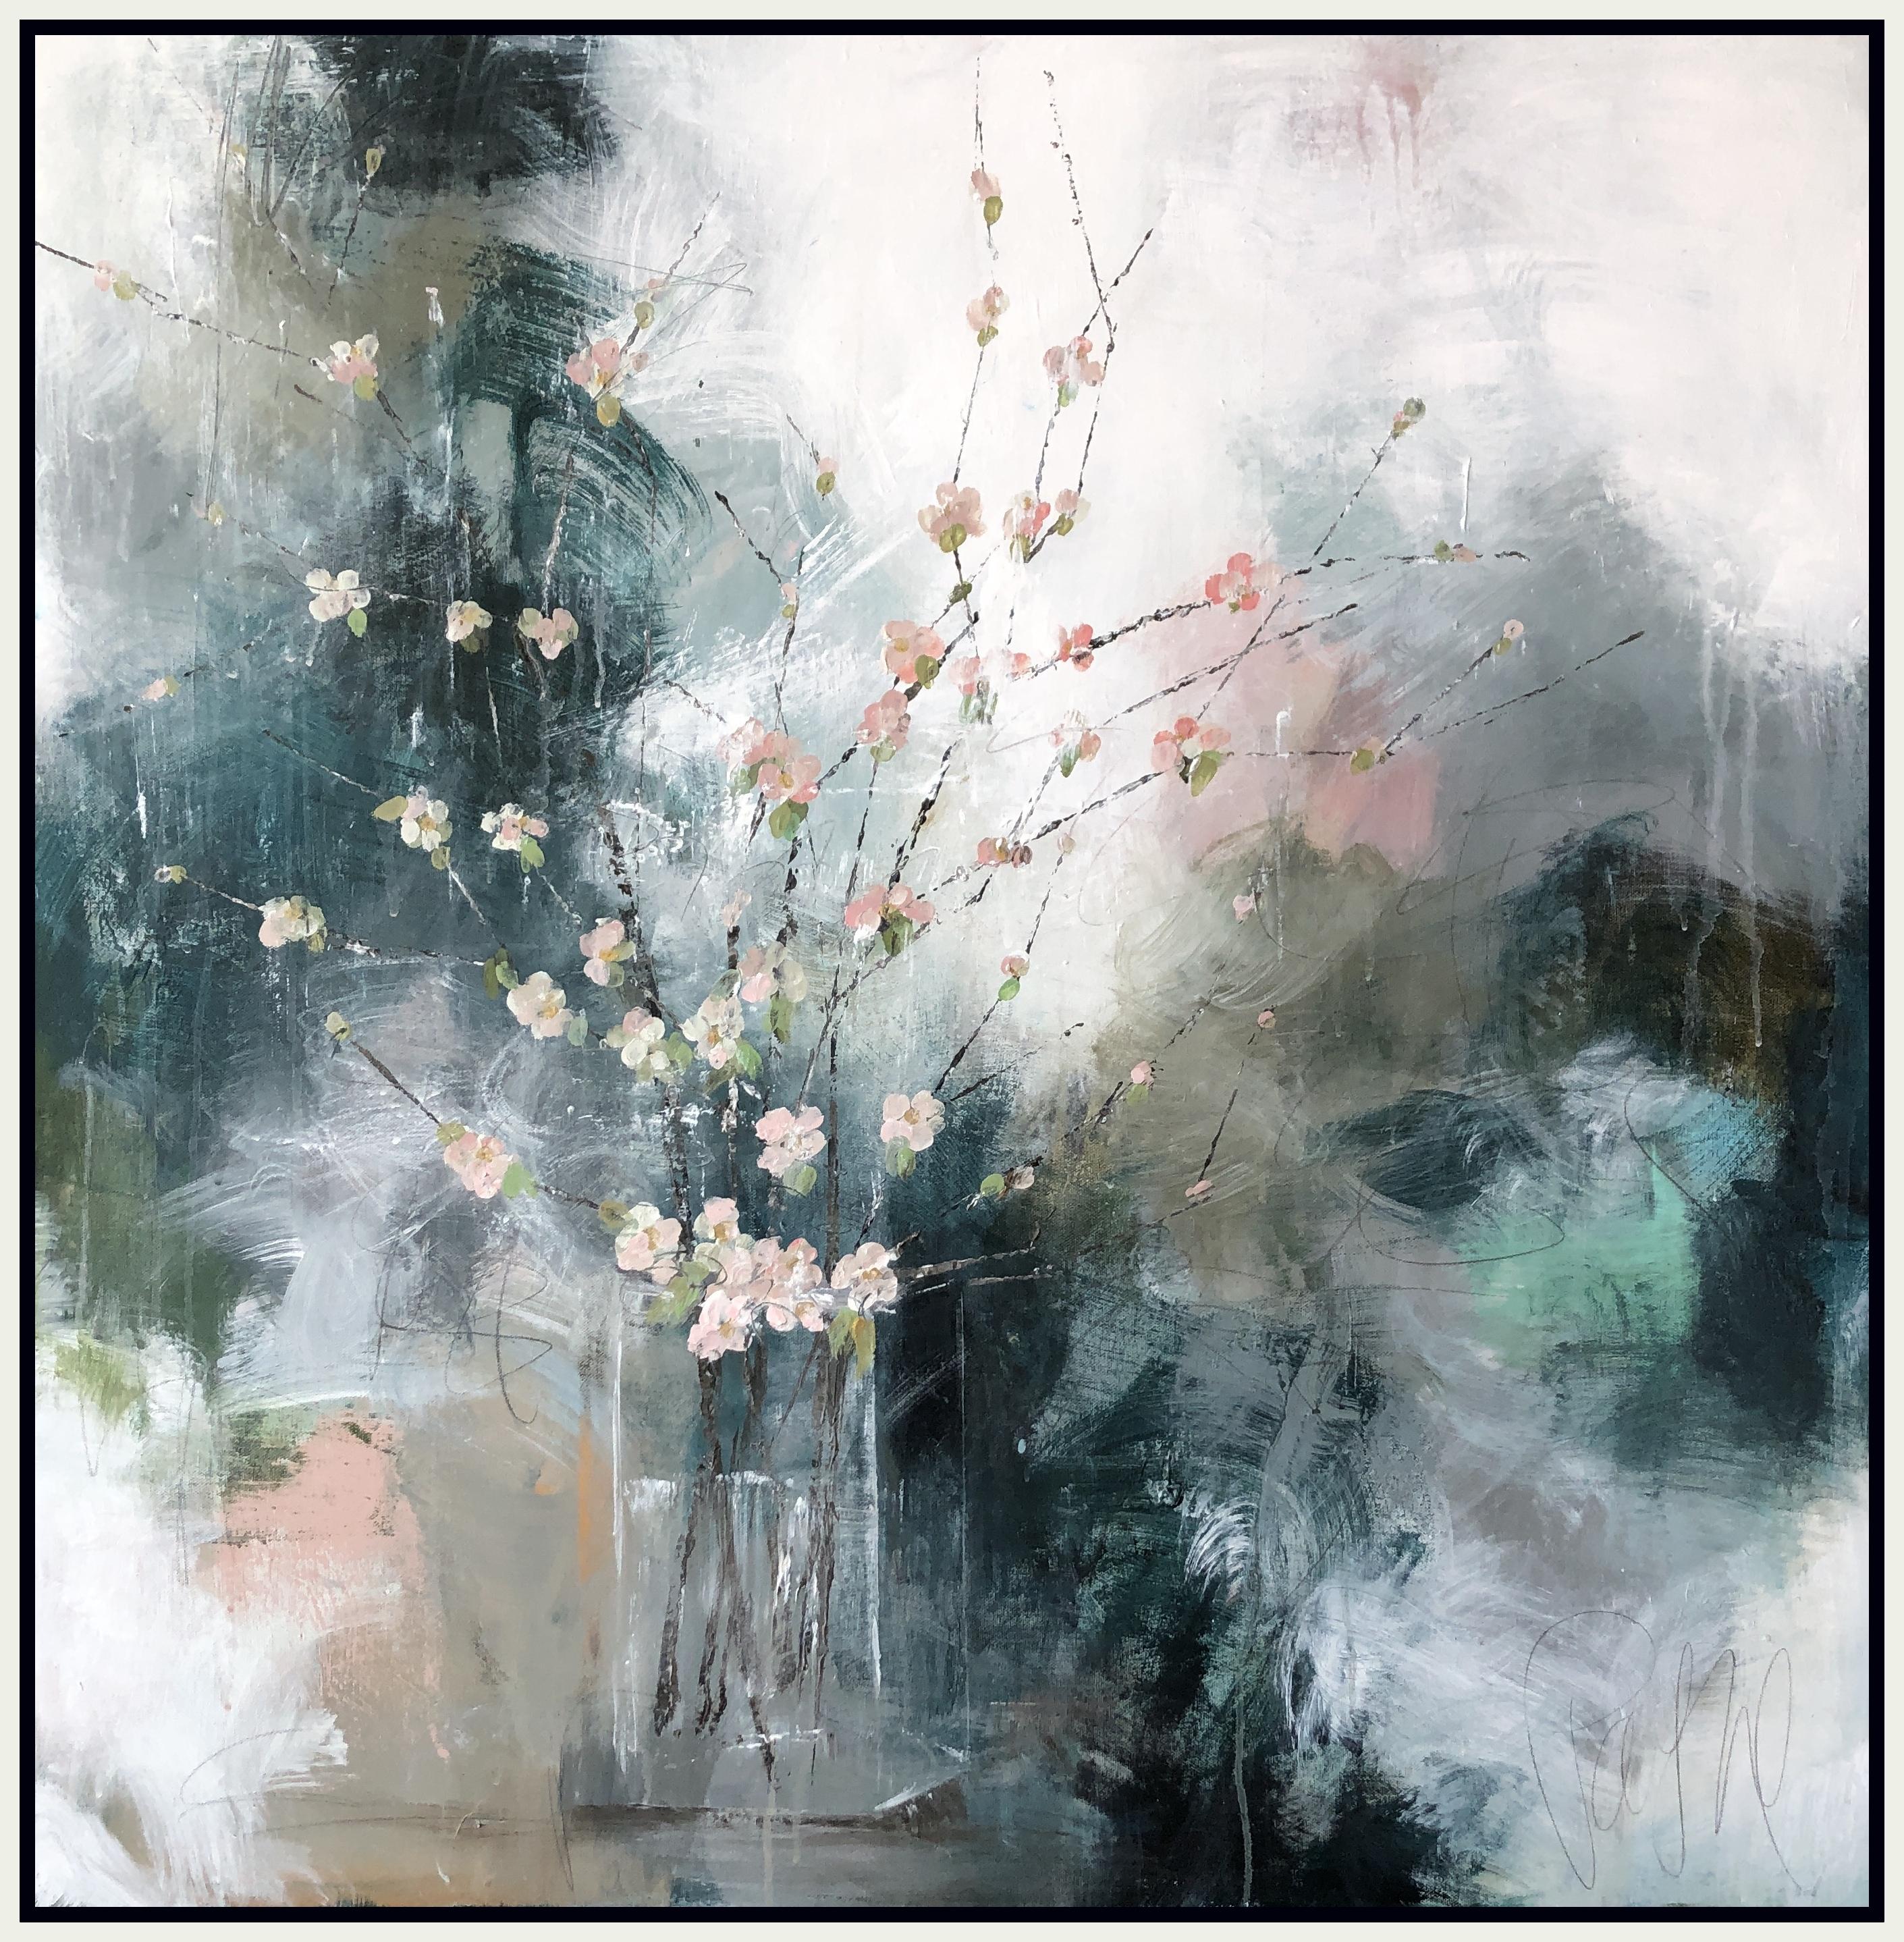 'Blushing' is a large contemporary mixed media on canvas floral painting of square format created by American artist Melissa Payne Baker in 2019. Featuring a delicate arrangement of pink blossoms displayed inside a glass vessel, the painting touches